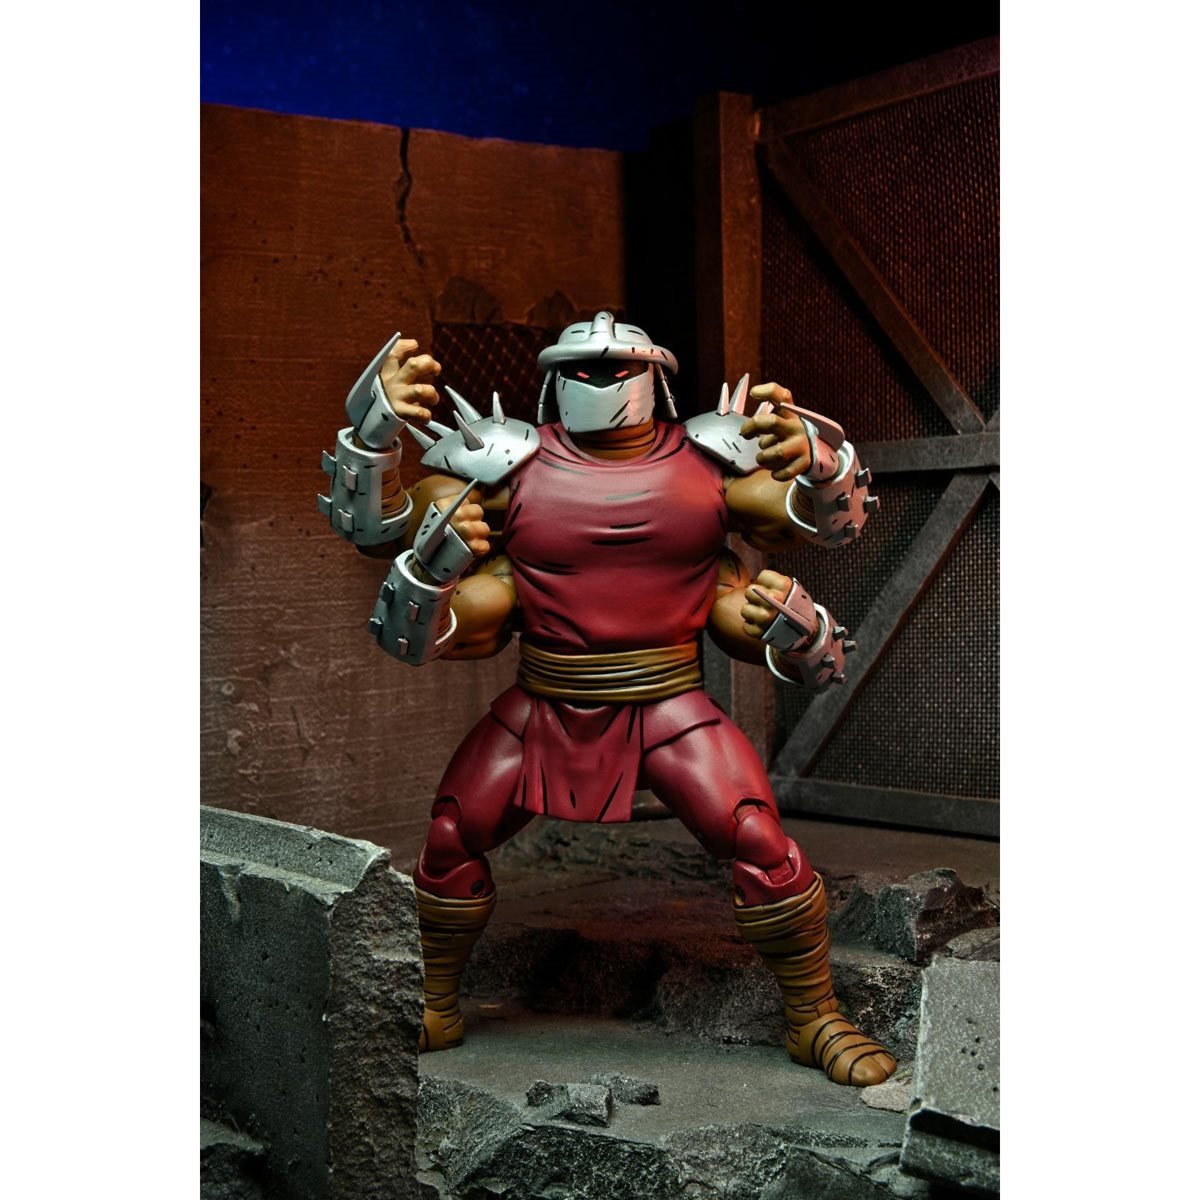 Shredder Shreds Your Kitchen: A New TMNT Collectible